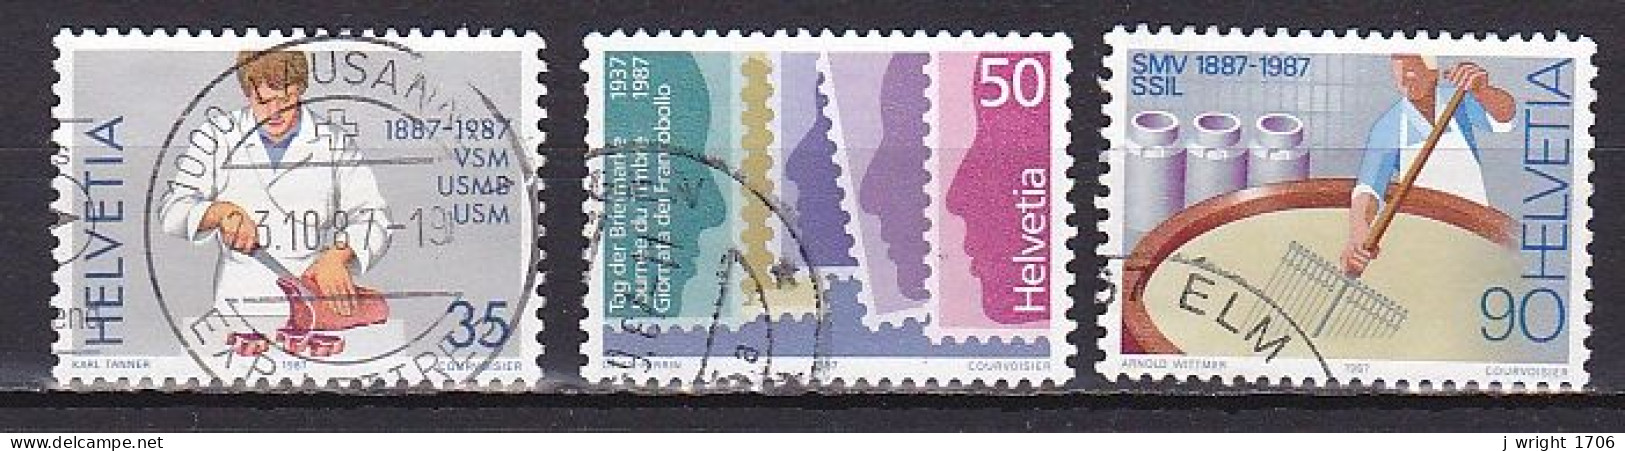 Switzerland, 1987, Stamp Day & Publicity Issue, Set, USED - Used Stamps